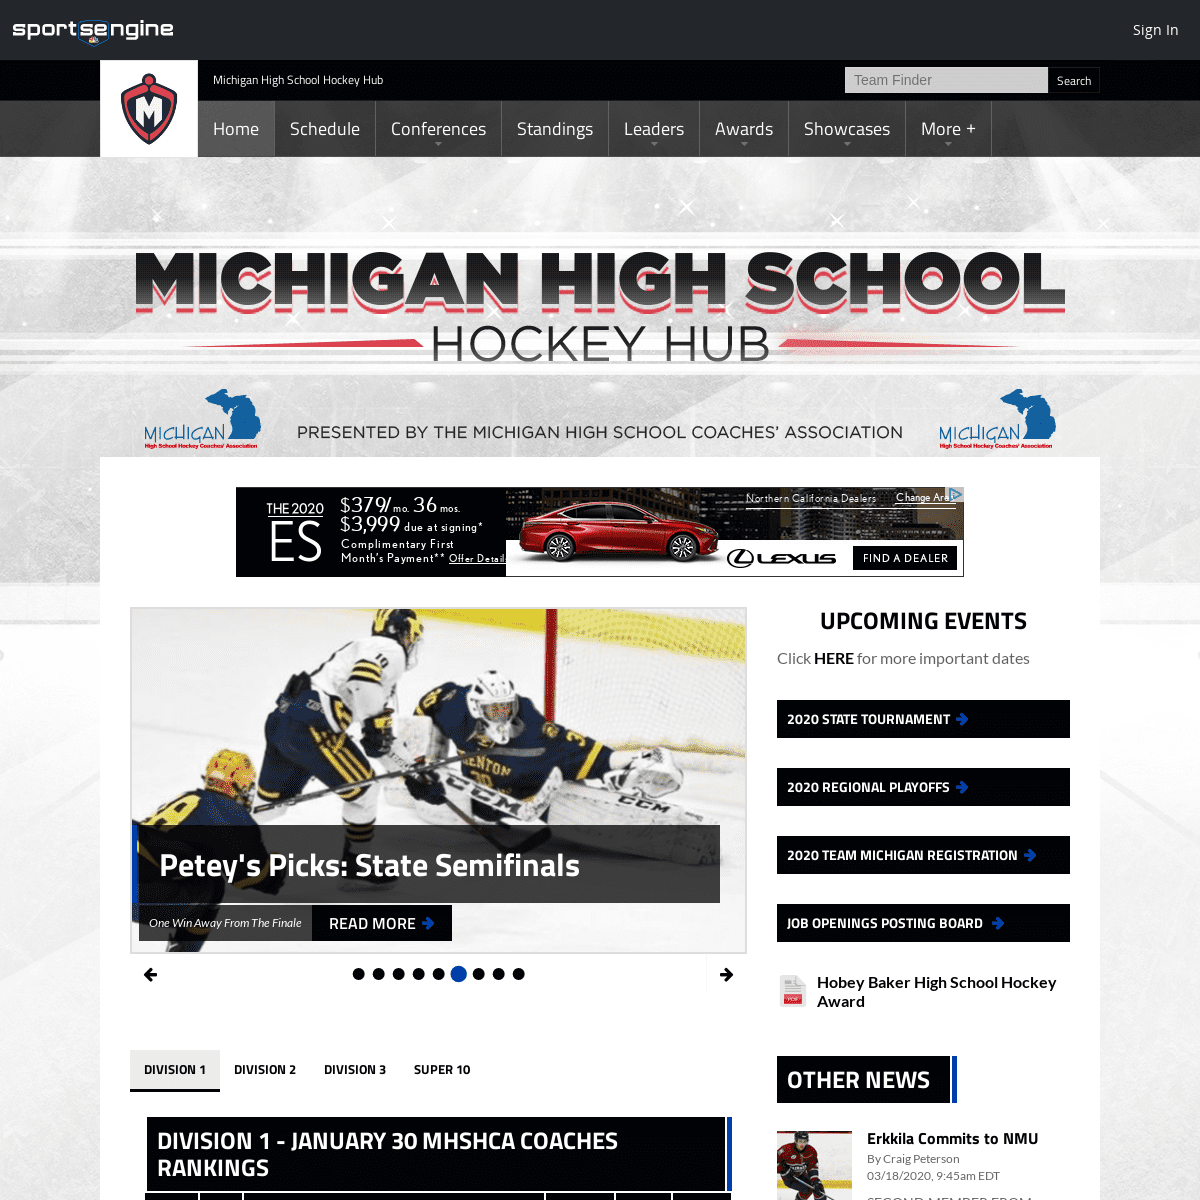 A complete backup of mihshockeyhub.com